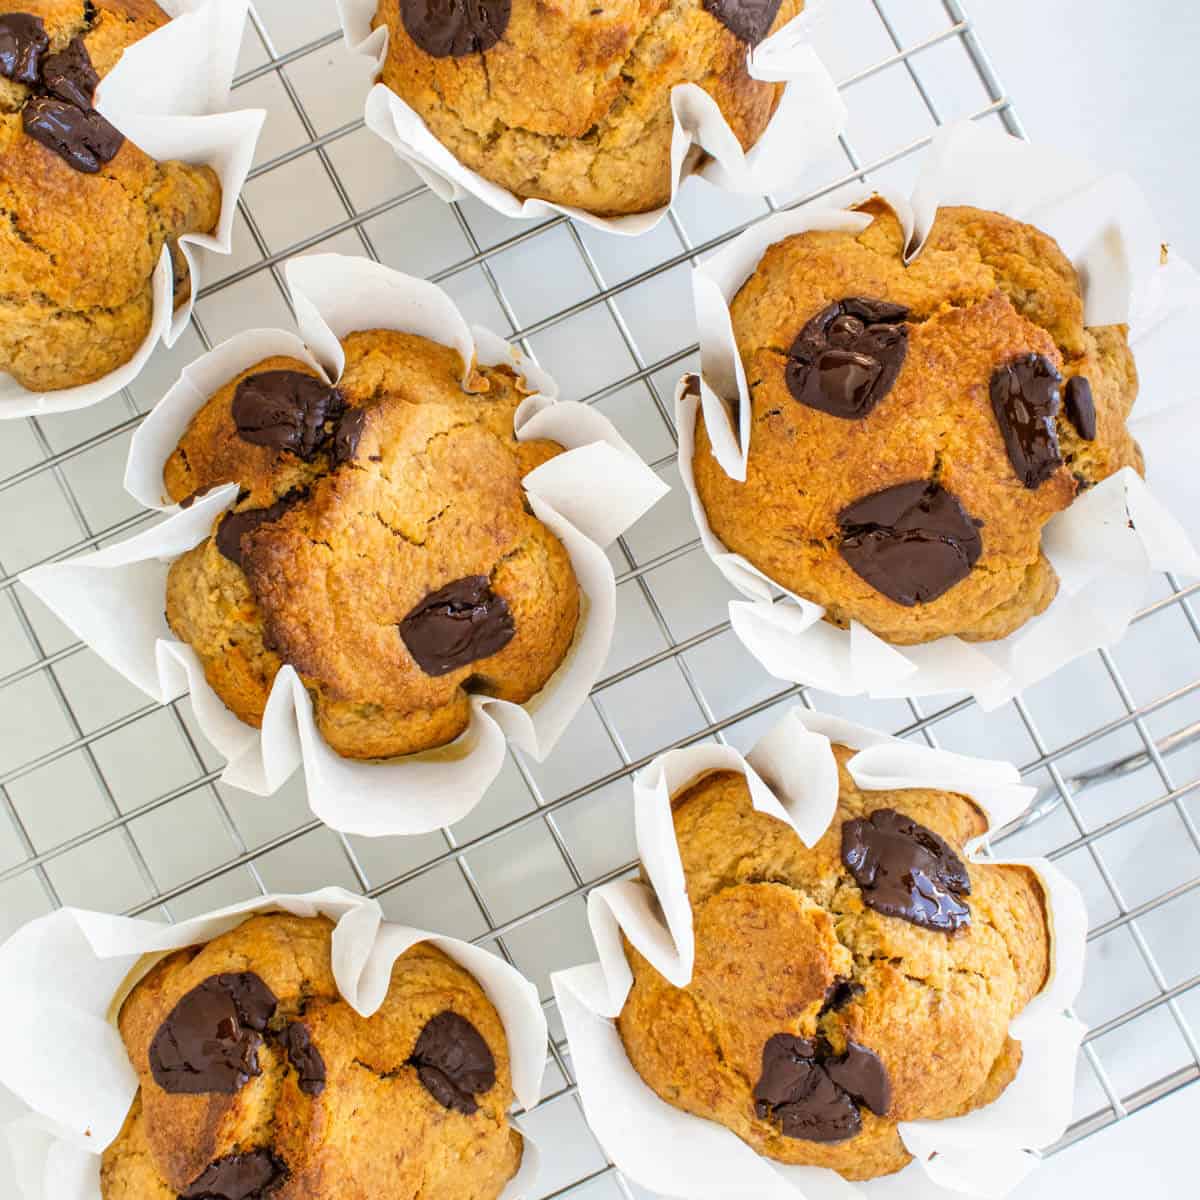 Healthy banana chocolate chip muffins resting on a cooling rack